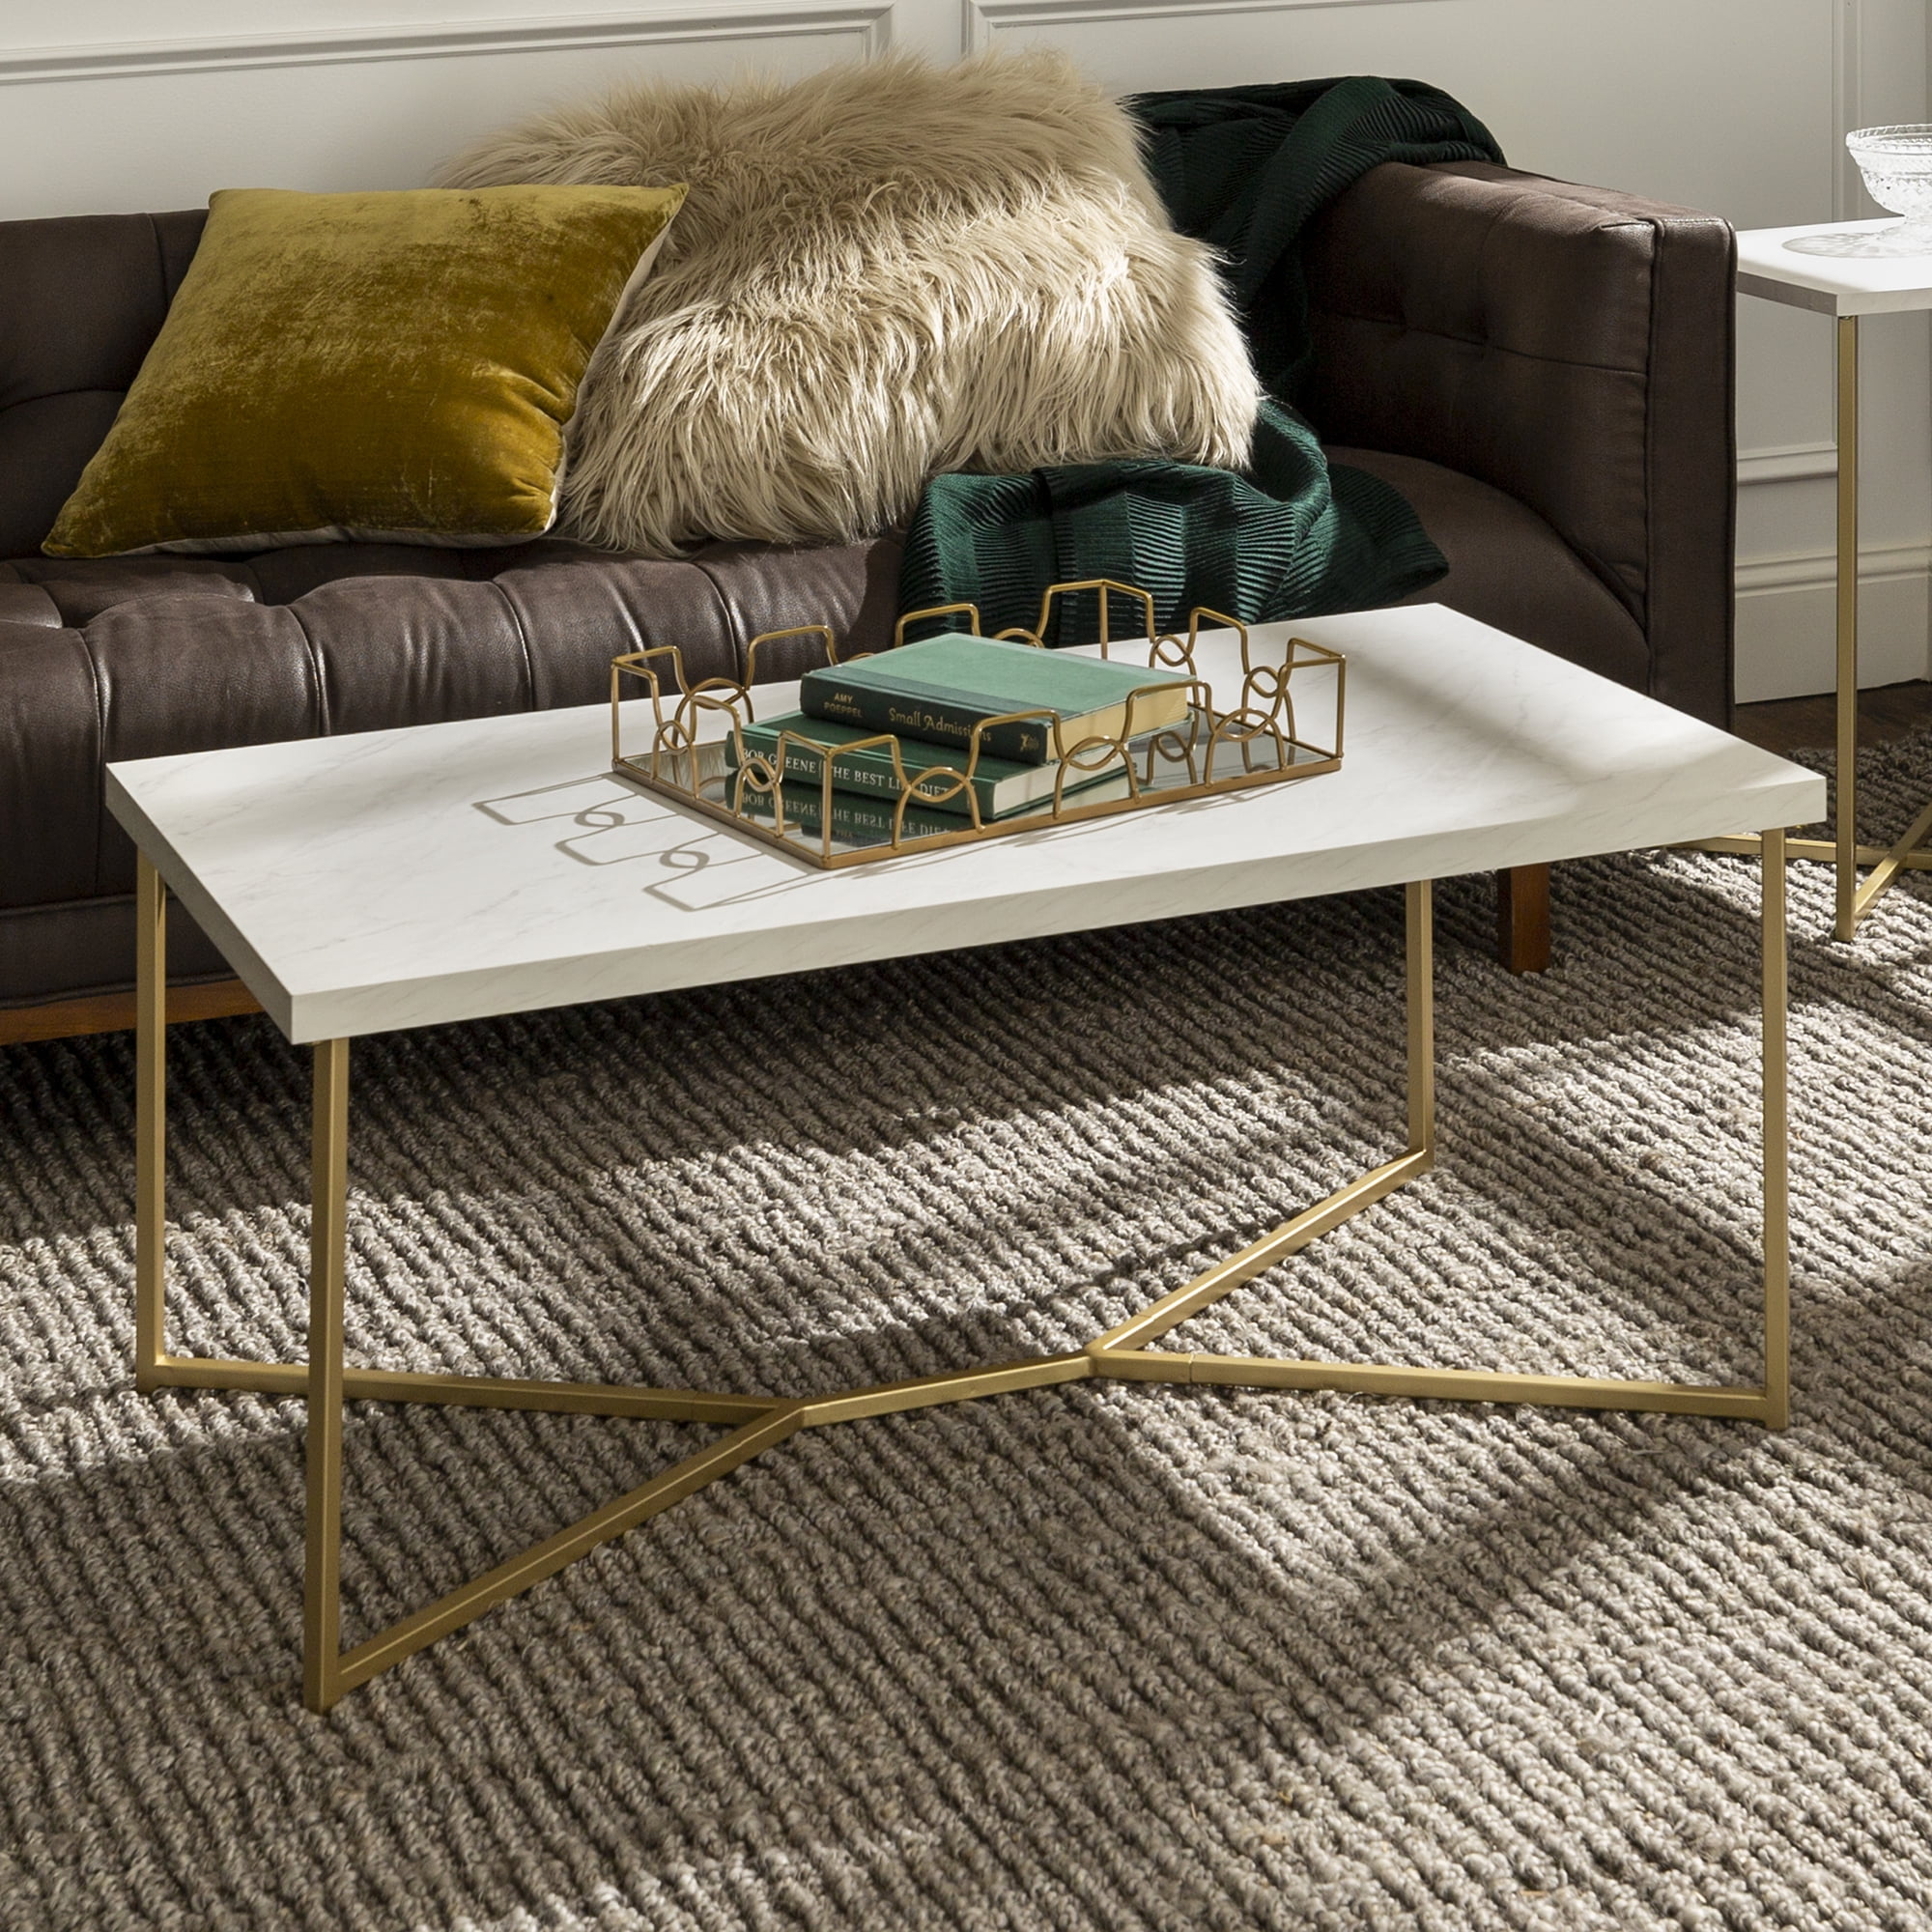 Diana YLeg White Faux Marble and Gold Coffee Table by Ember Interiors